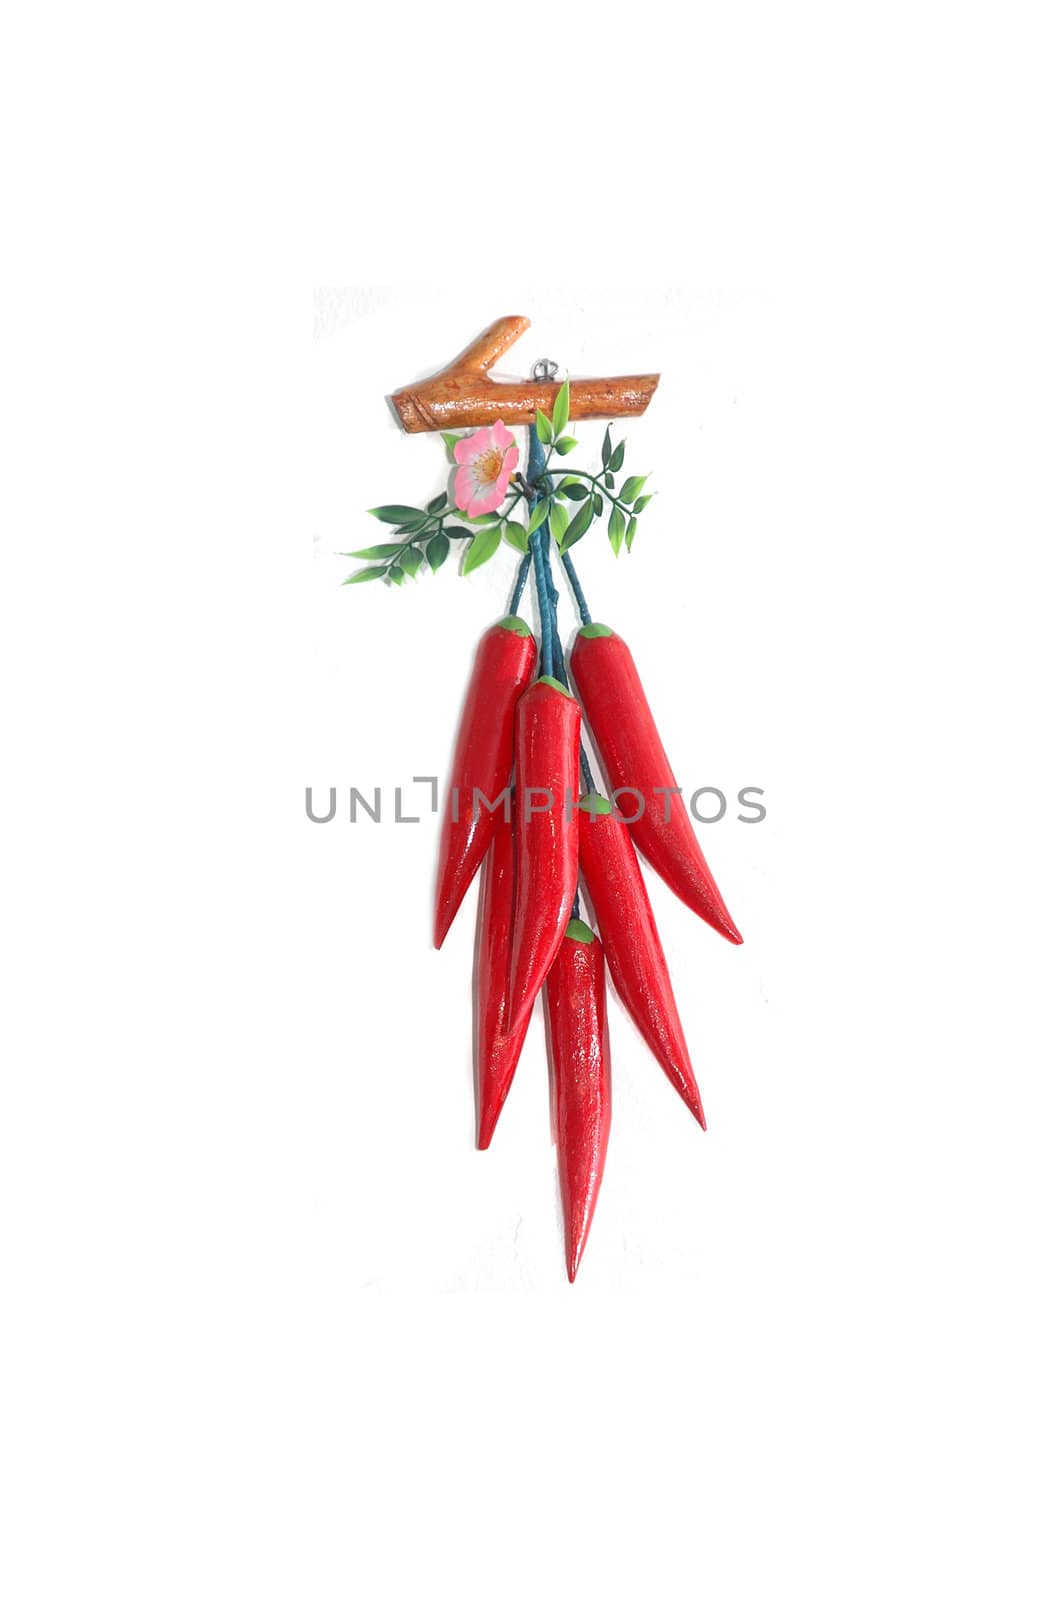 fake red chilli as wall hangings isolated on white background